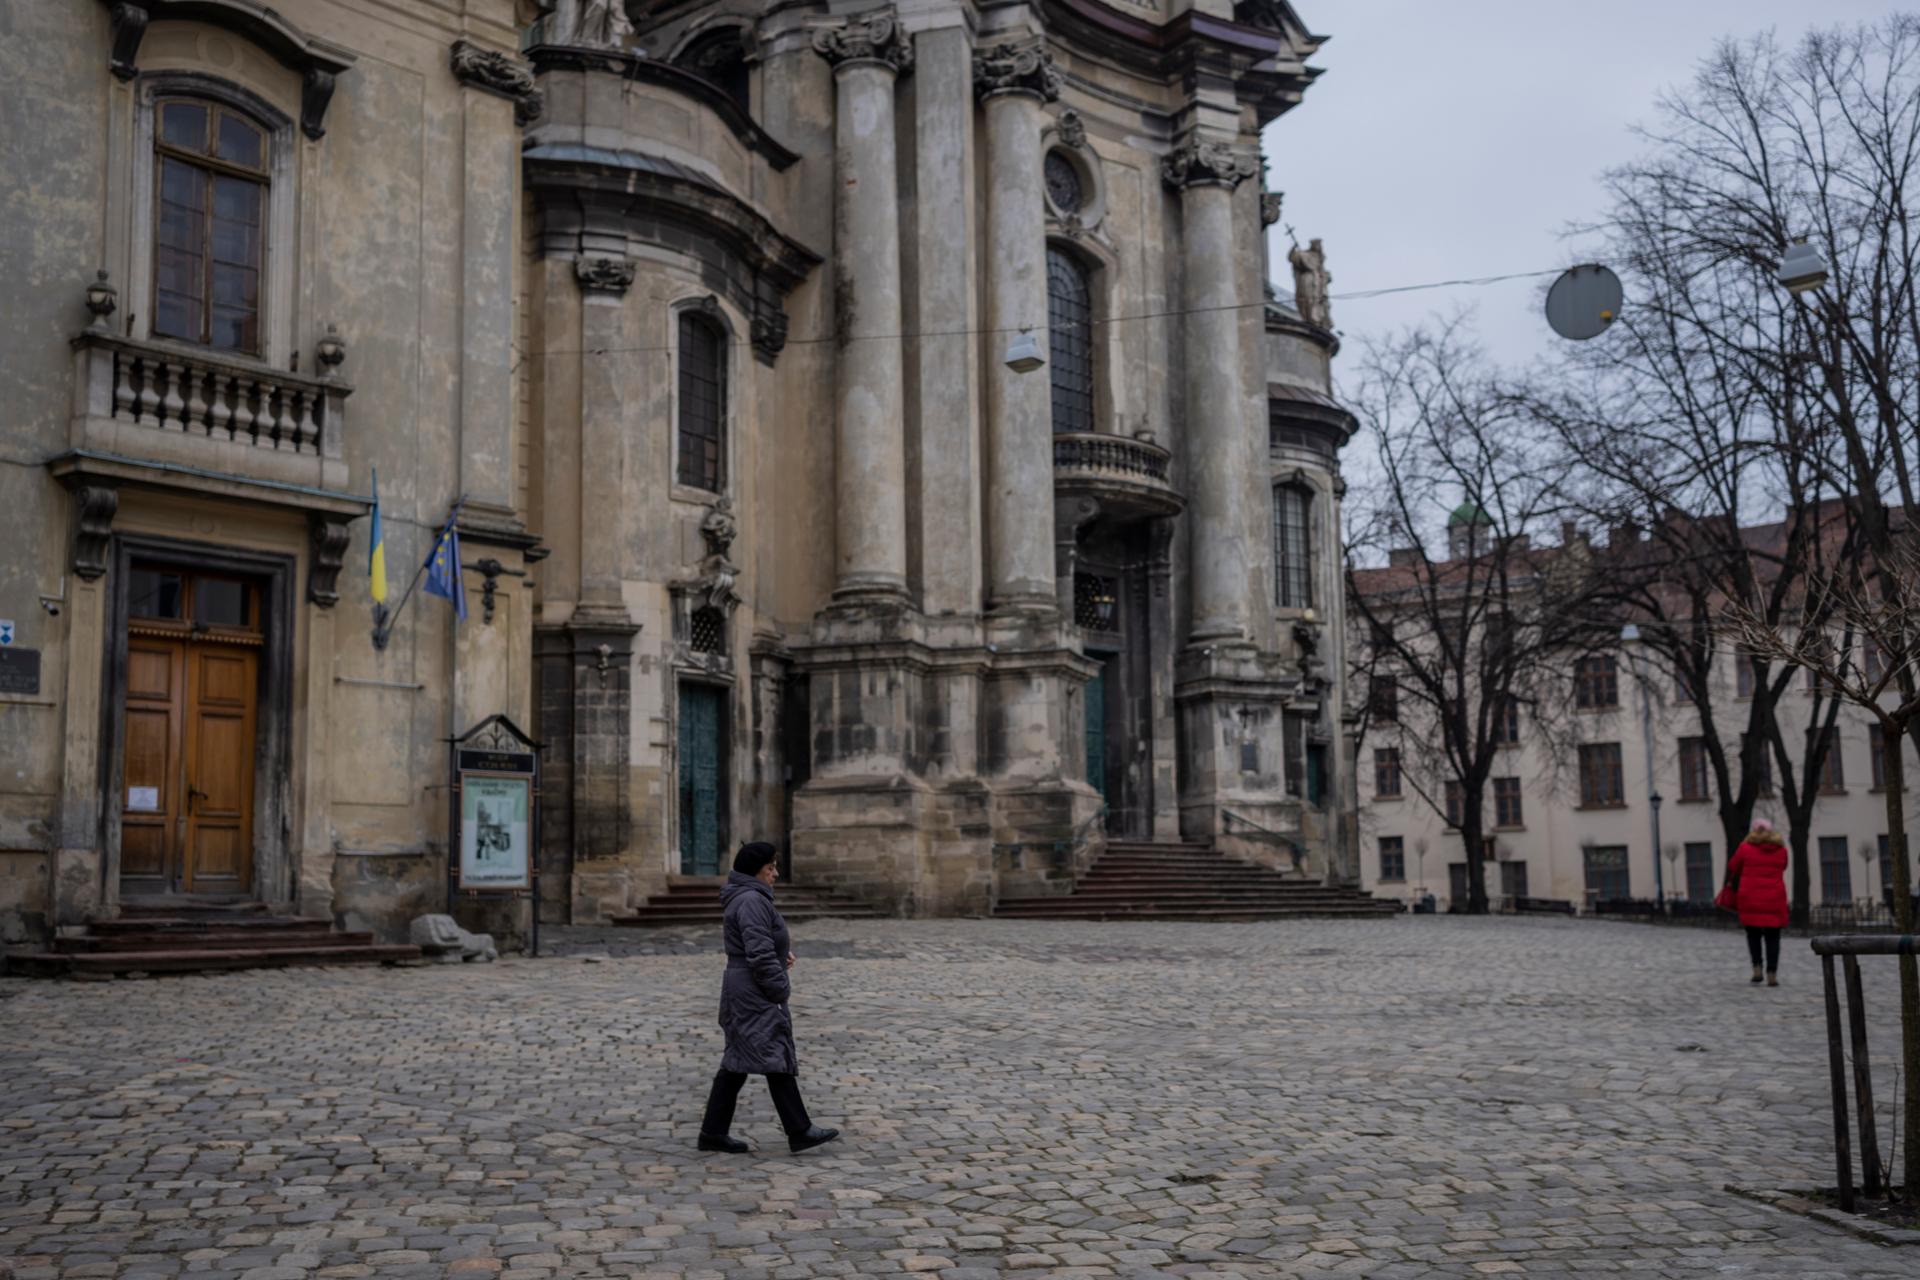 A woman walks past the Museum of the History of Religion in Lviv, western Ukraine, March 4, 2022. Workers are assembling metal containers in the patio at the museum to safely store the remaining items before placing them in basements in case the Russian i